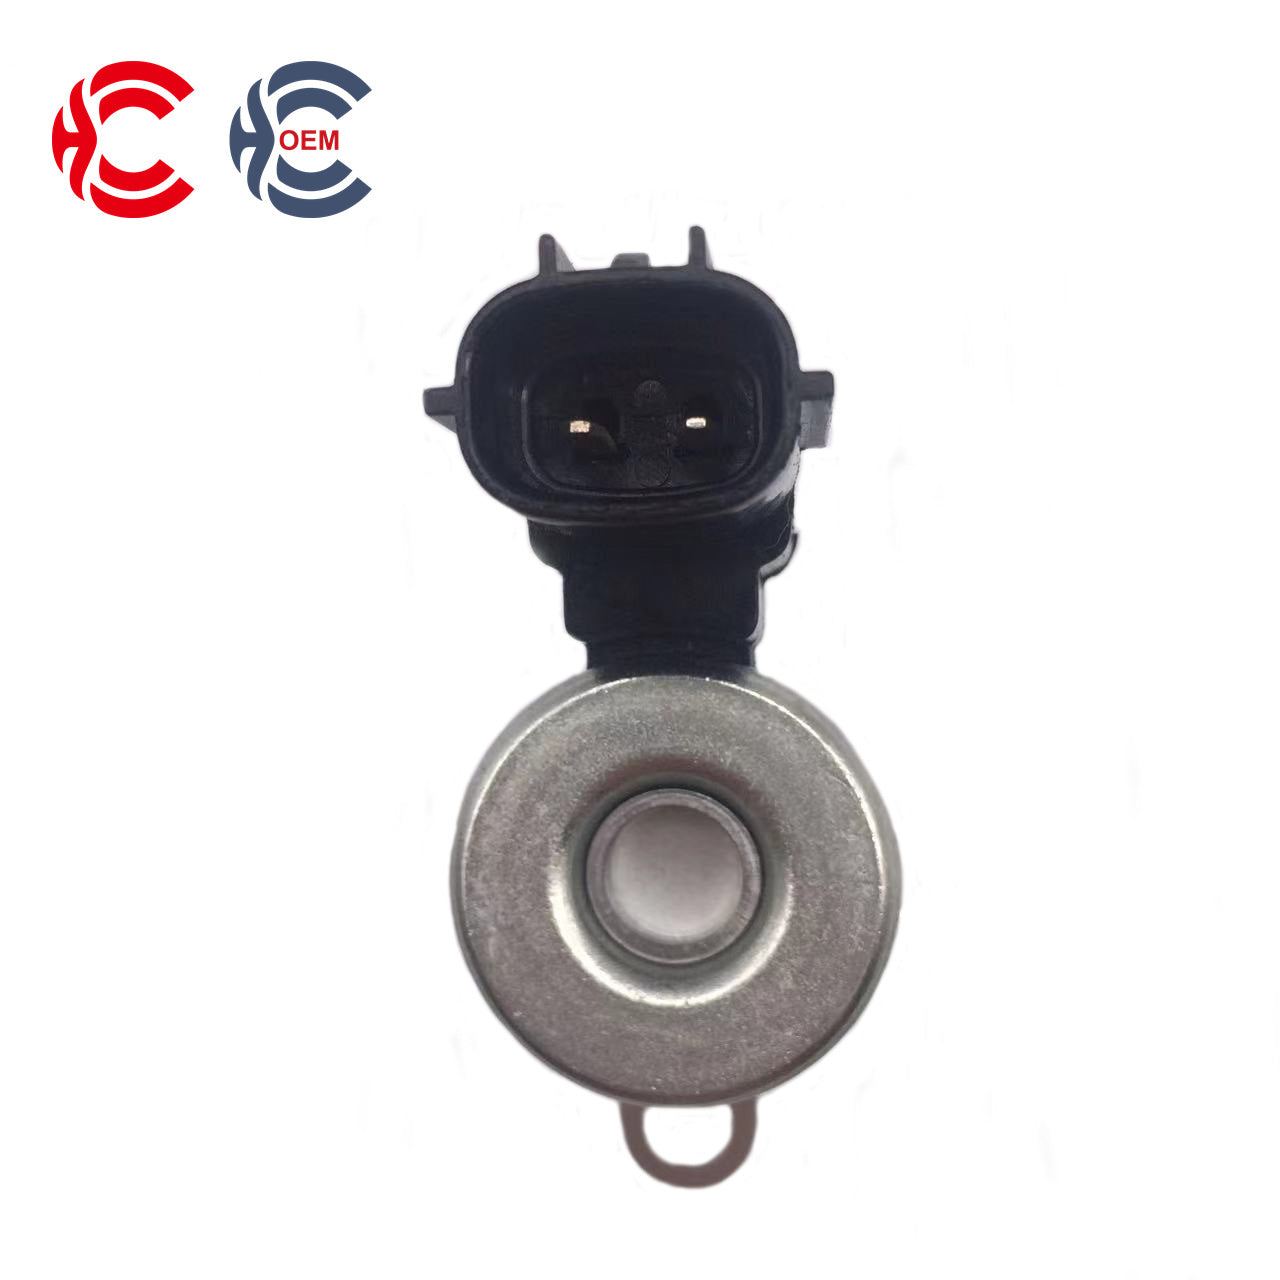 OEM: 4884483ABMaterial: ABS metalColor: black silverOrigin: Made in ChinaWeight: 300gPacking List: 1* VVT Solenoid Valve More ServiceWe can provide OEM Manufacturing serviceWe can Be your one-step solution for Auto PartsWe can provide technical scheme for you Feel Free to Contact Us, We will get back to you as soon as possible.